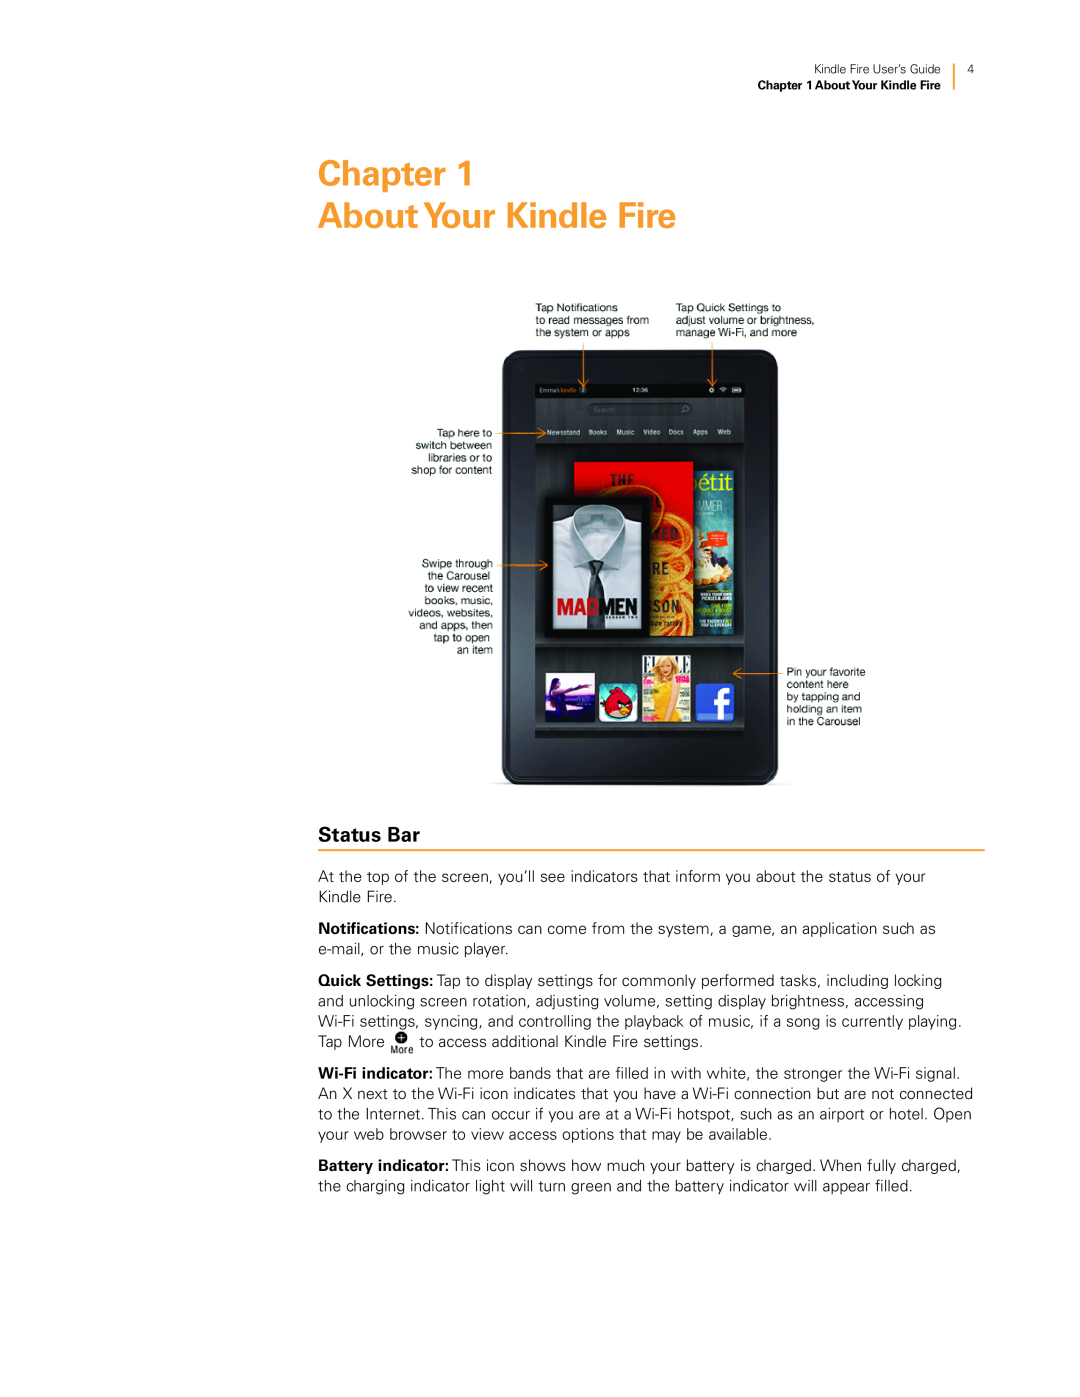 Amazon B0051VVOB2, KNDFRHD16, 23-000454-01, KNDFR8WIFI manual About Your Kindle Fire, Status Bar 